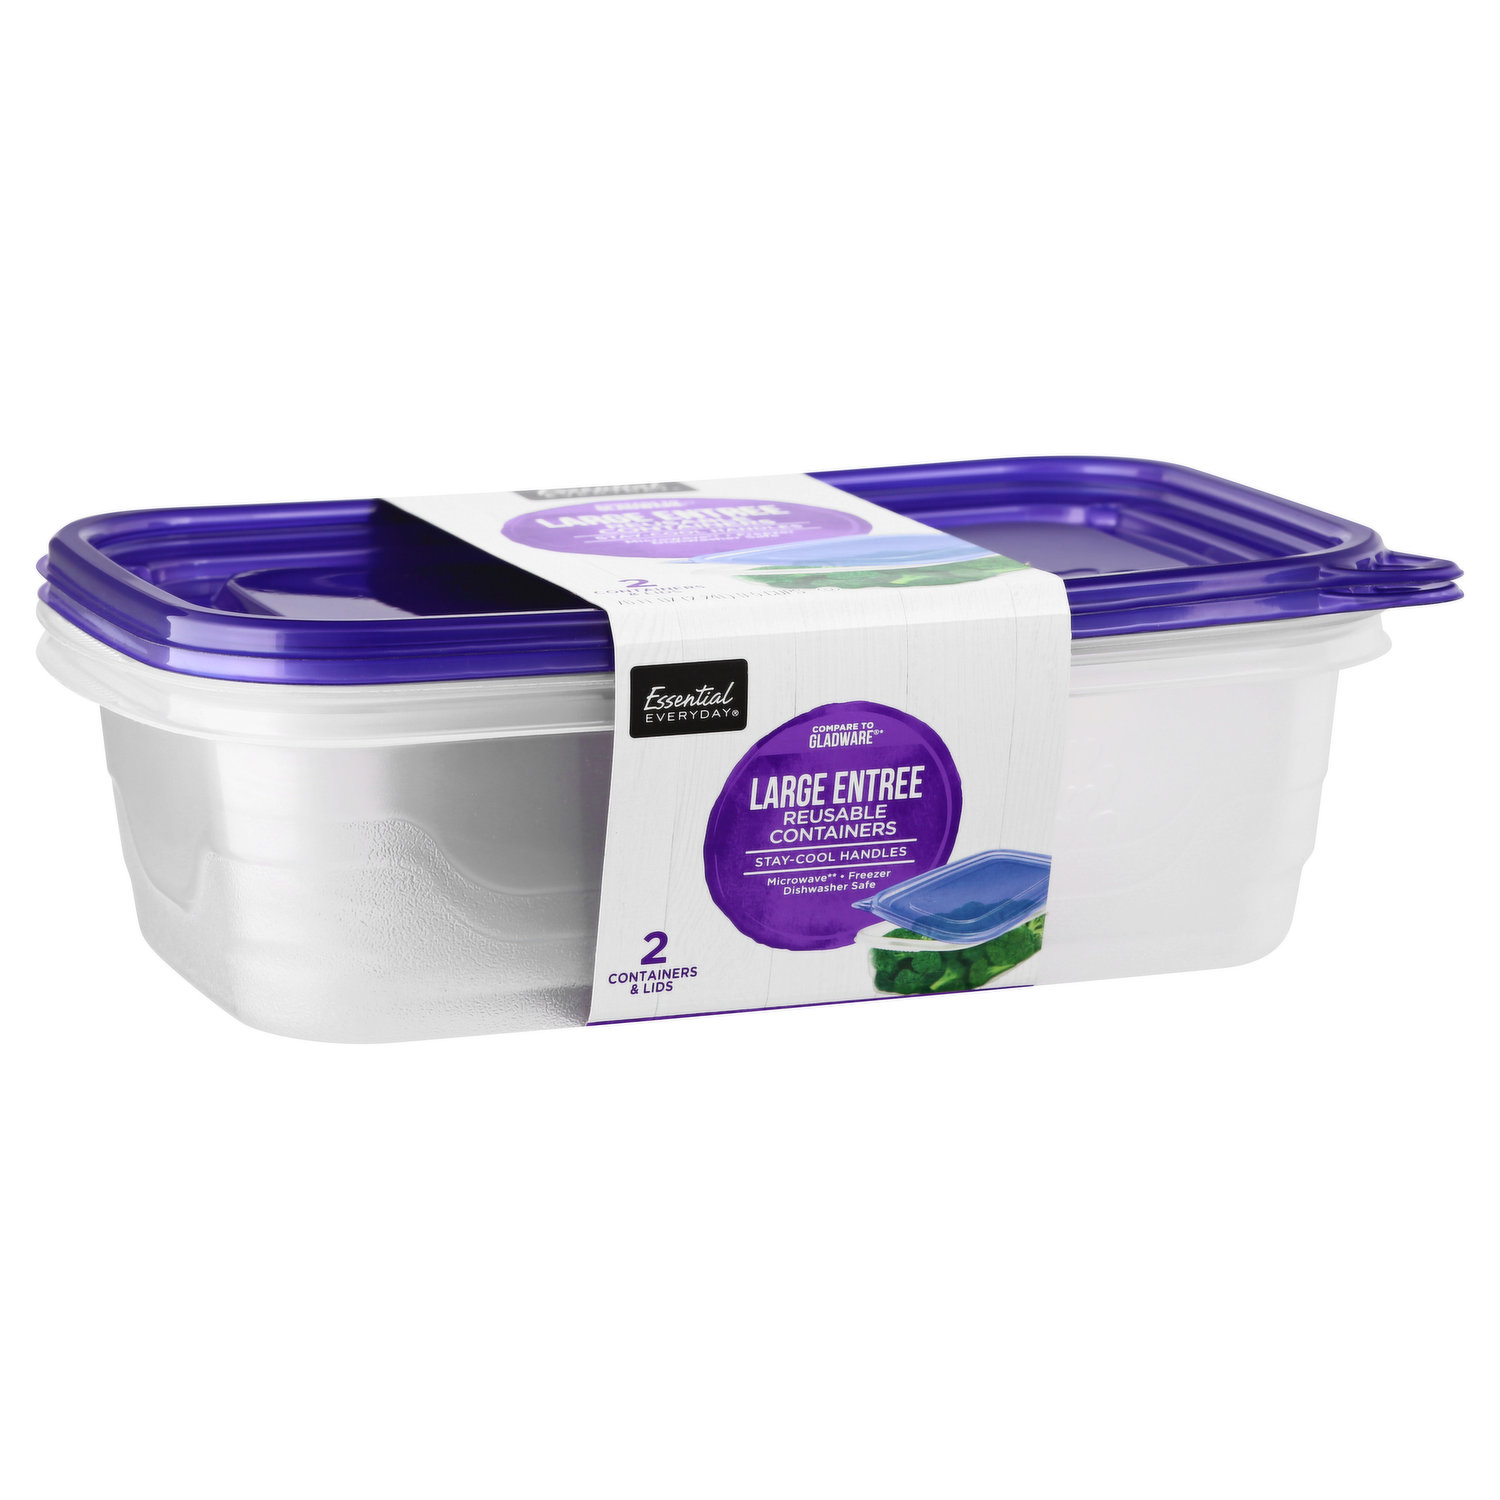 Essential Everyday Reusable Containers, Big Bowl, 48 Fluid Ounce 3 ea, Plastic Bags